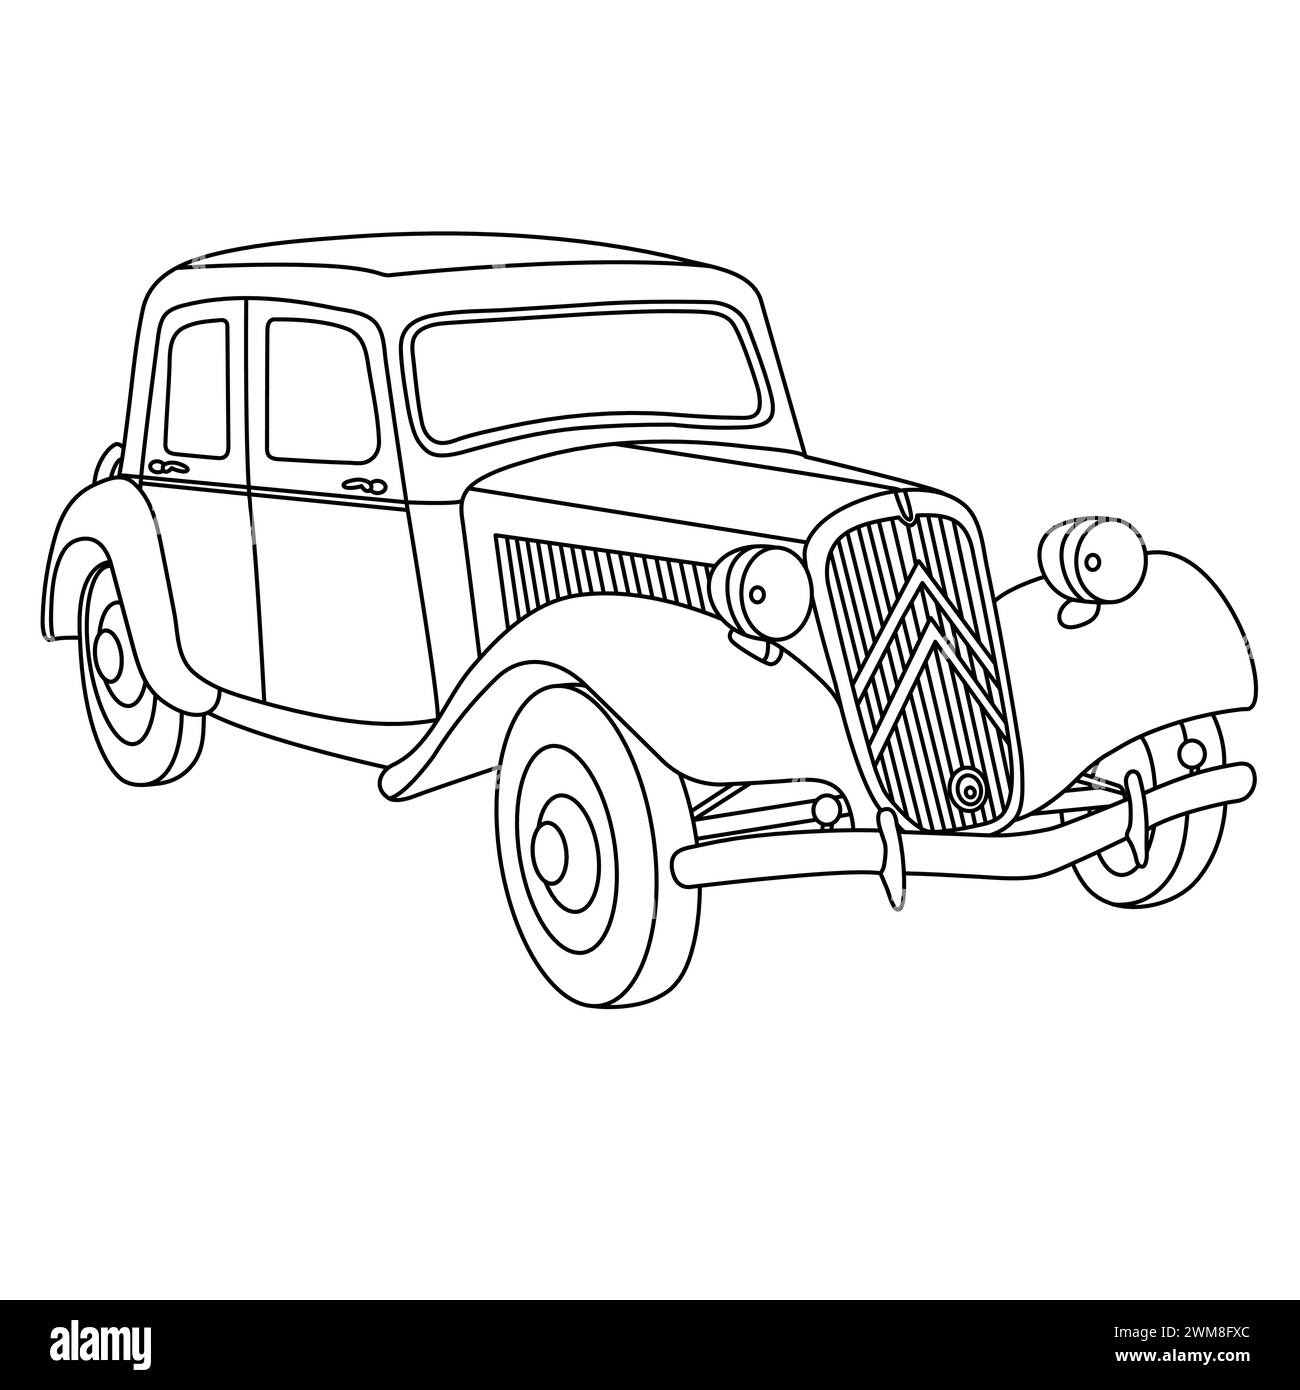 Citroen B11 Sport 4-Door Berline 1947 Outline Vector Illustration. Adult Old Car Coloring Page. Cartoon Vehicle Isolated on White Background. Vintage Stock Vector